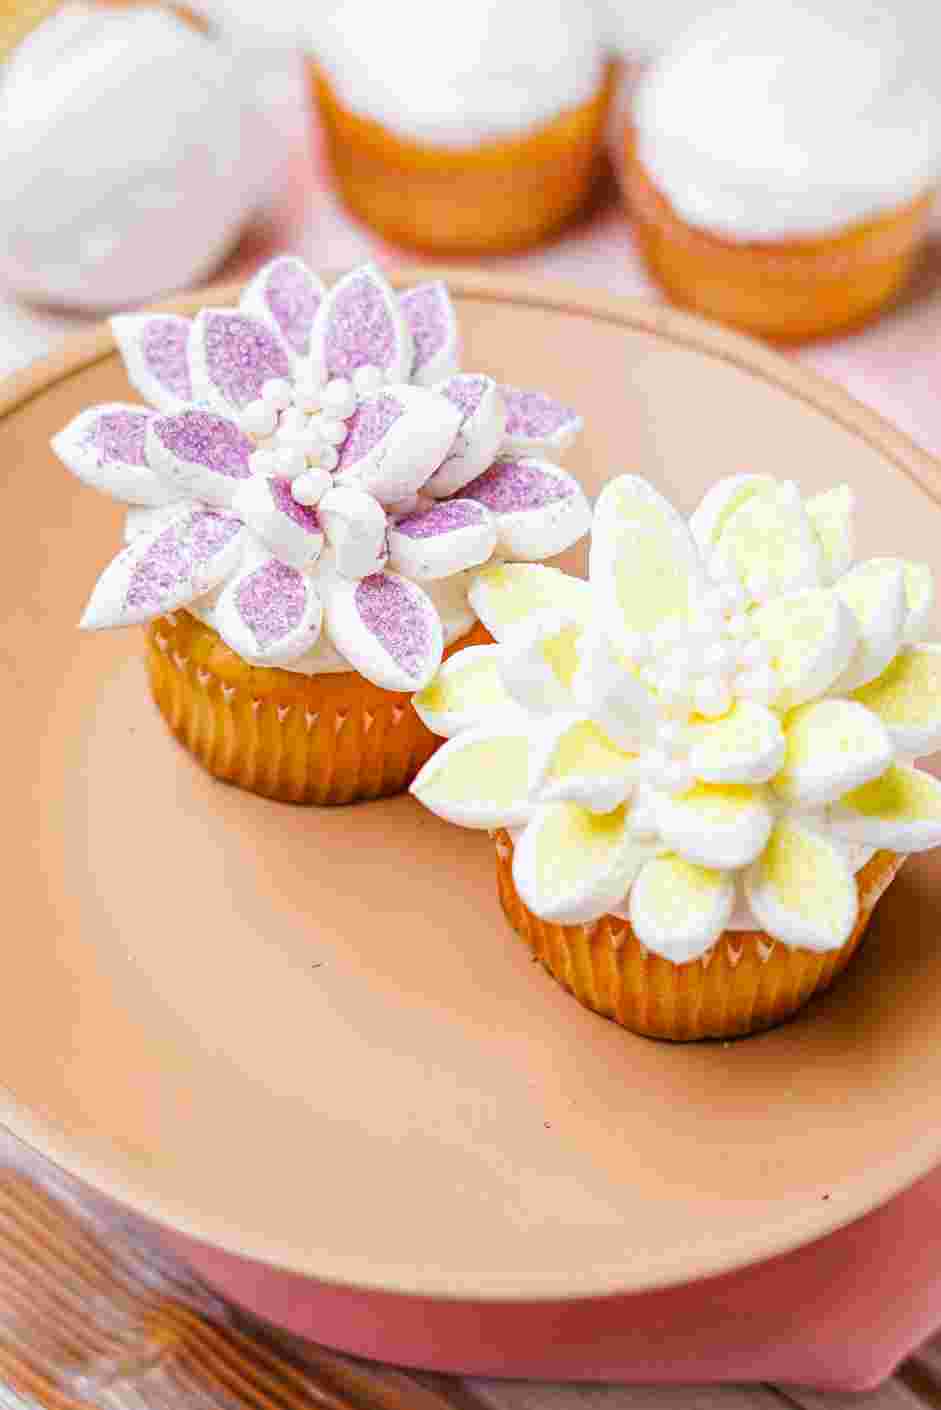 Flower Cupcakes Recipe: 
Sprinkle the nonpareils in the center of the flower cupcake for the pistil.